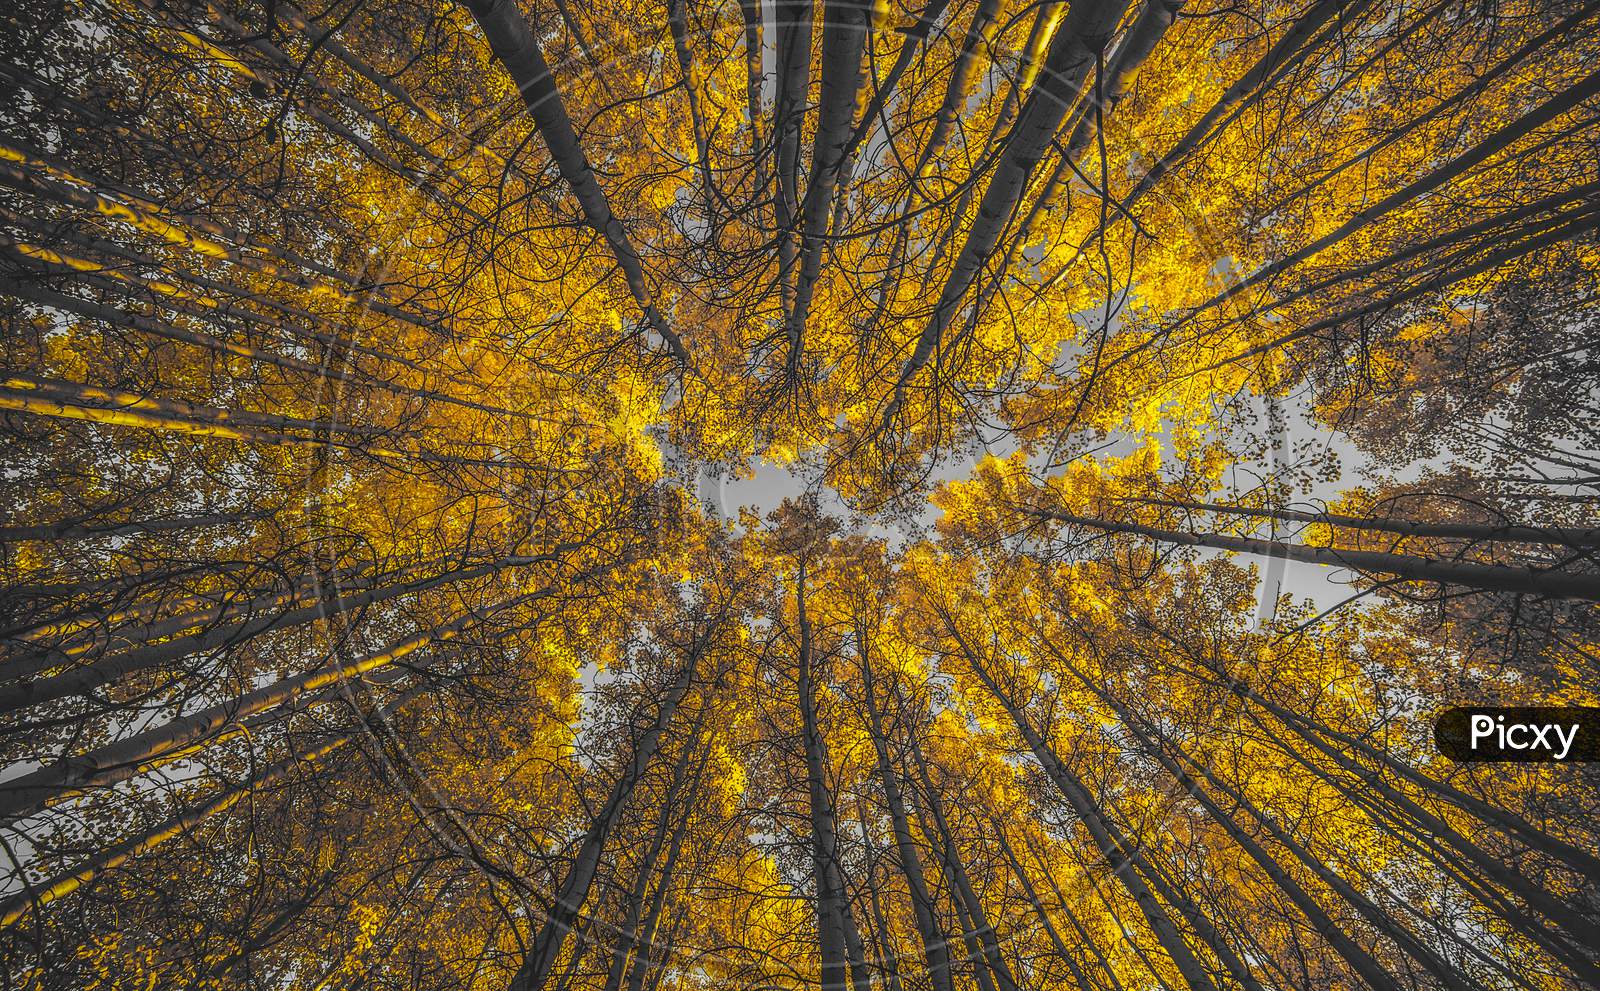 Bottom view of the tops of trees in the autumn forest